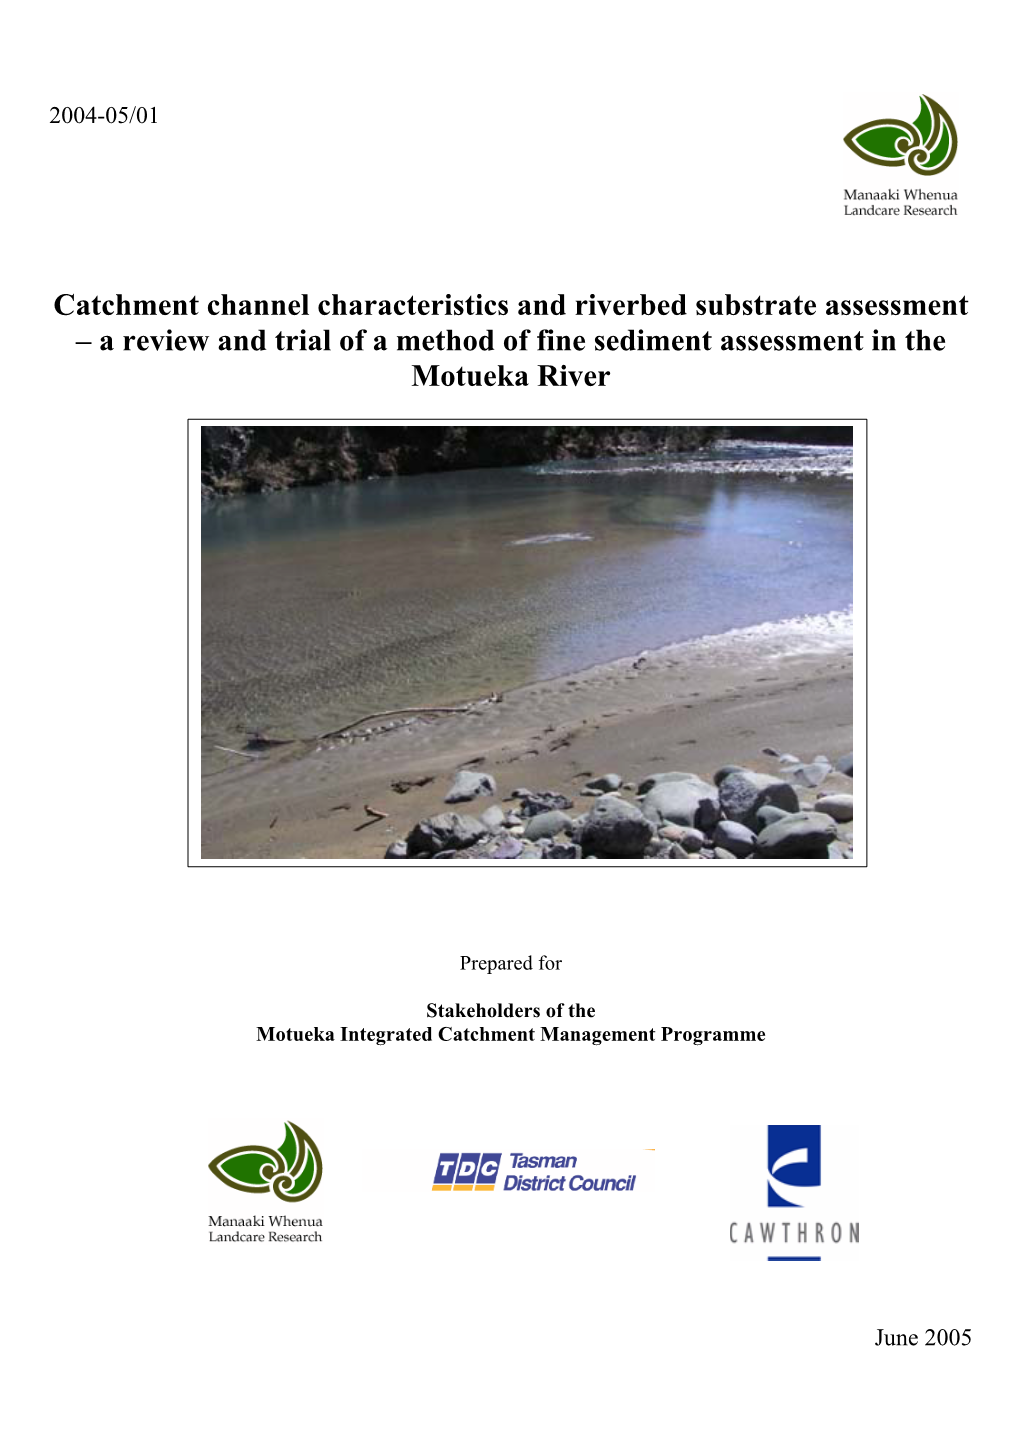 Catchment Channel Characteristics and Riverbed Substrate Assessment – a Review and Trial of a Method of Fine Sediment Assessment in the Motueka River